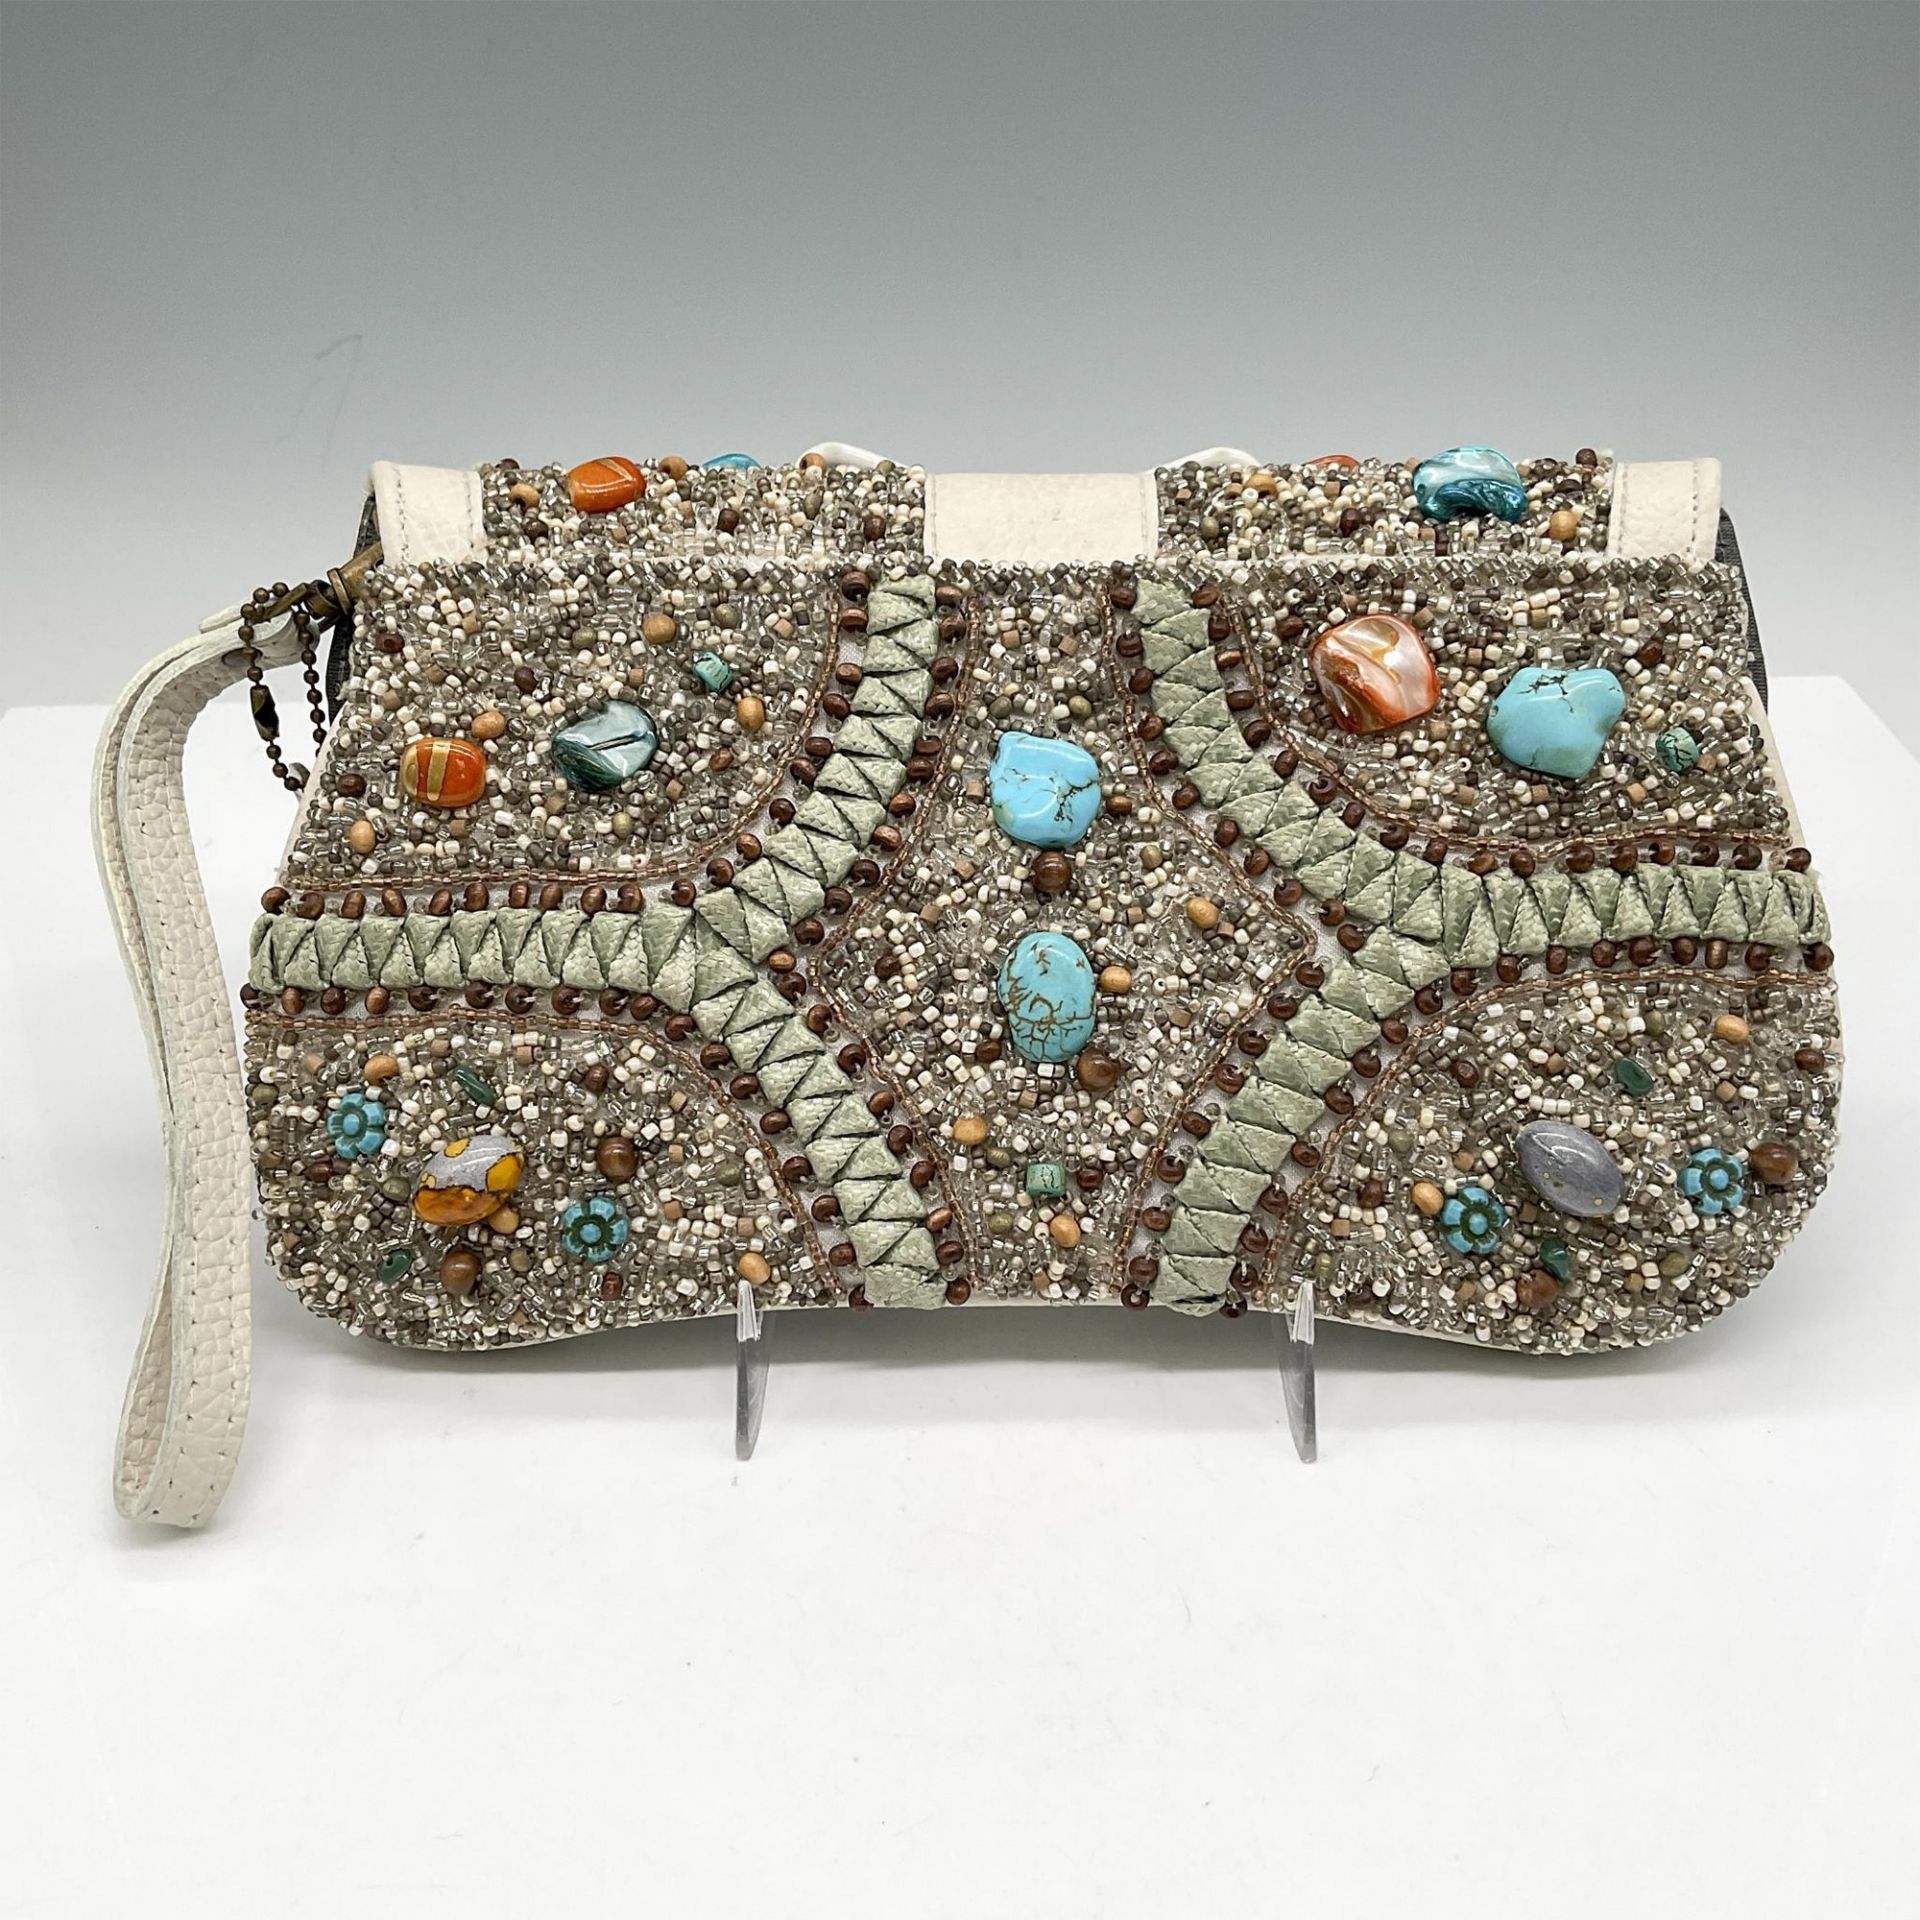 Mary Frances Beaded Clutch Bag - Image 2 of 4